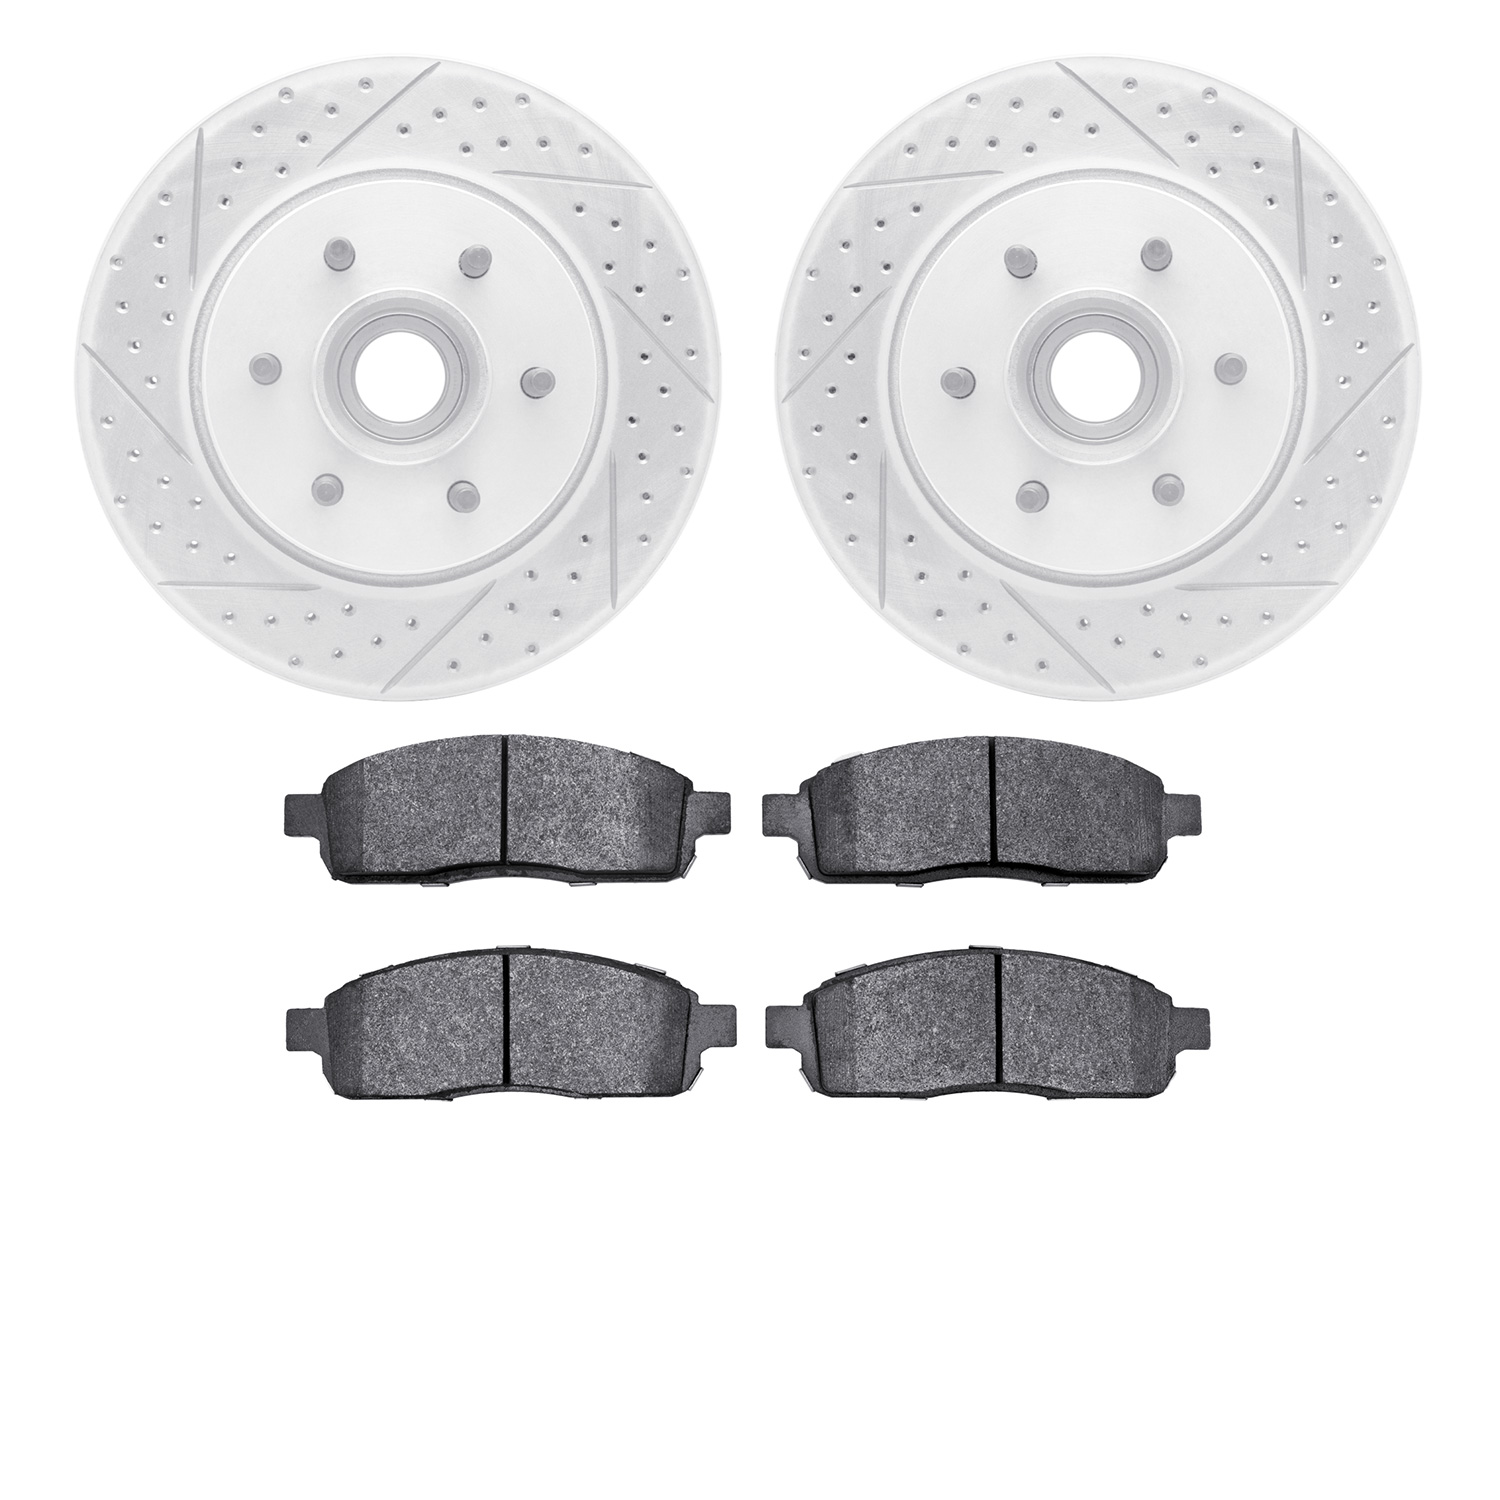 2502-54158 Geoperformance Drilled/Slotted Rotors w/5000 Advanced Brake Pads Kit, 2004-2008 Ford/Lincoln/Mercury/Mazda, Position: